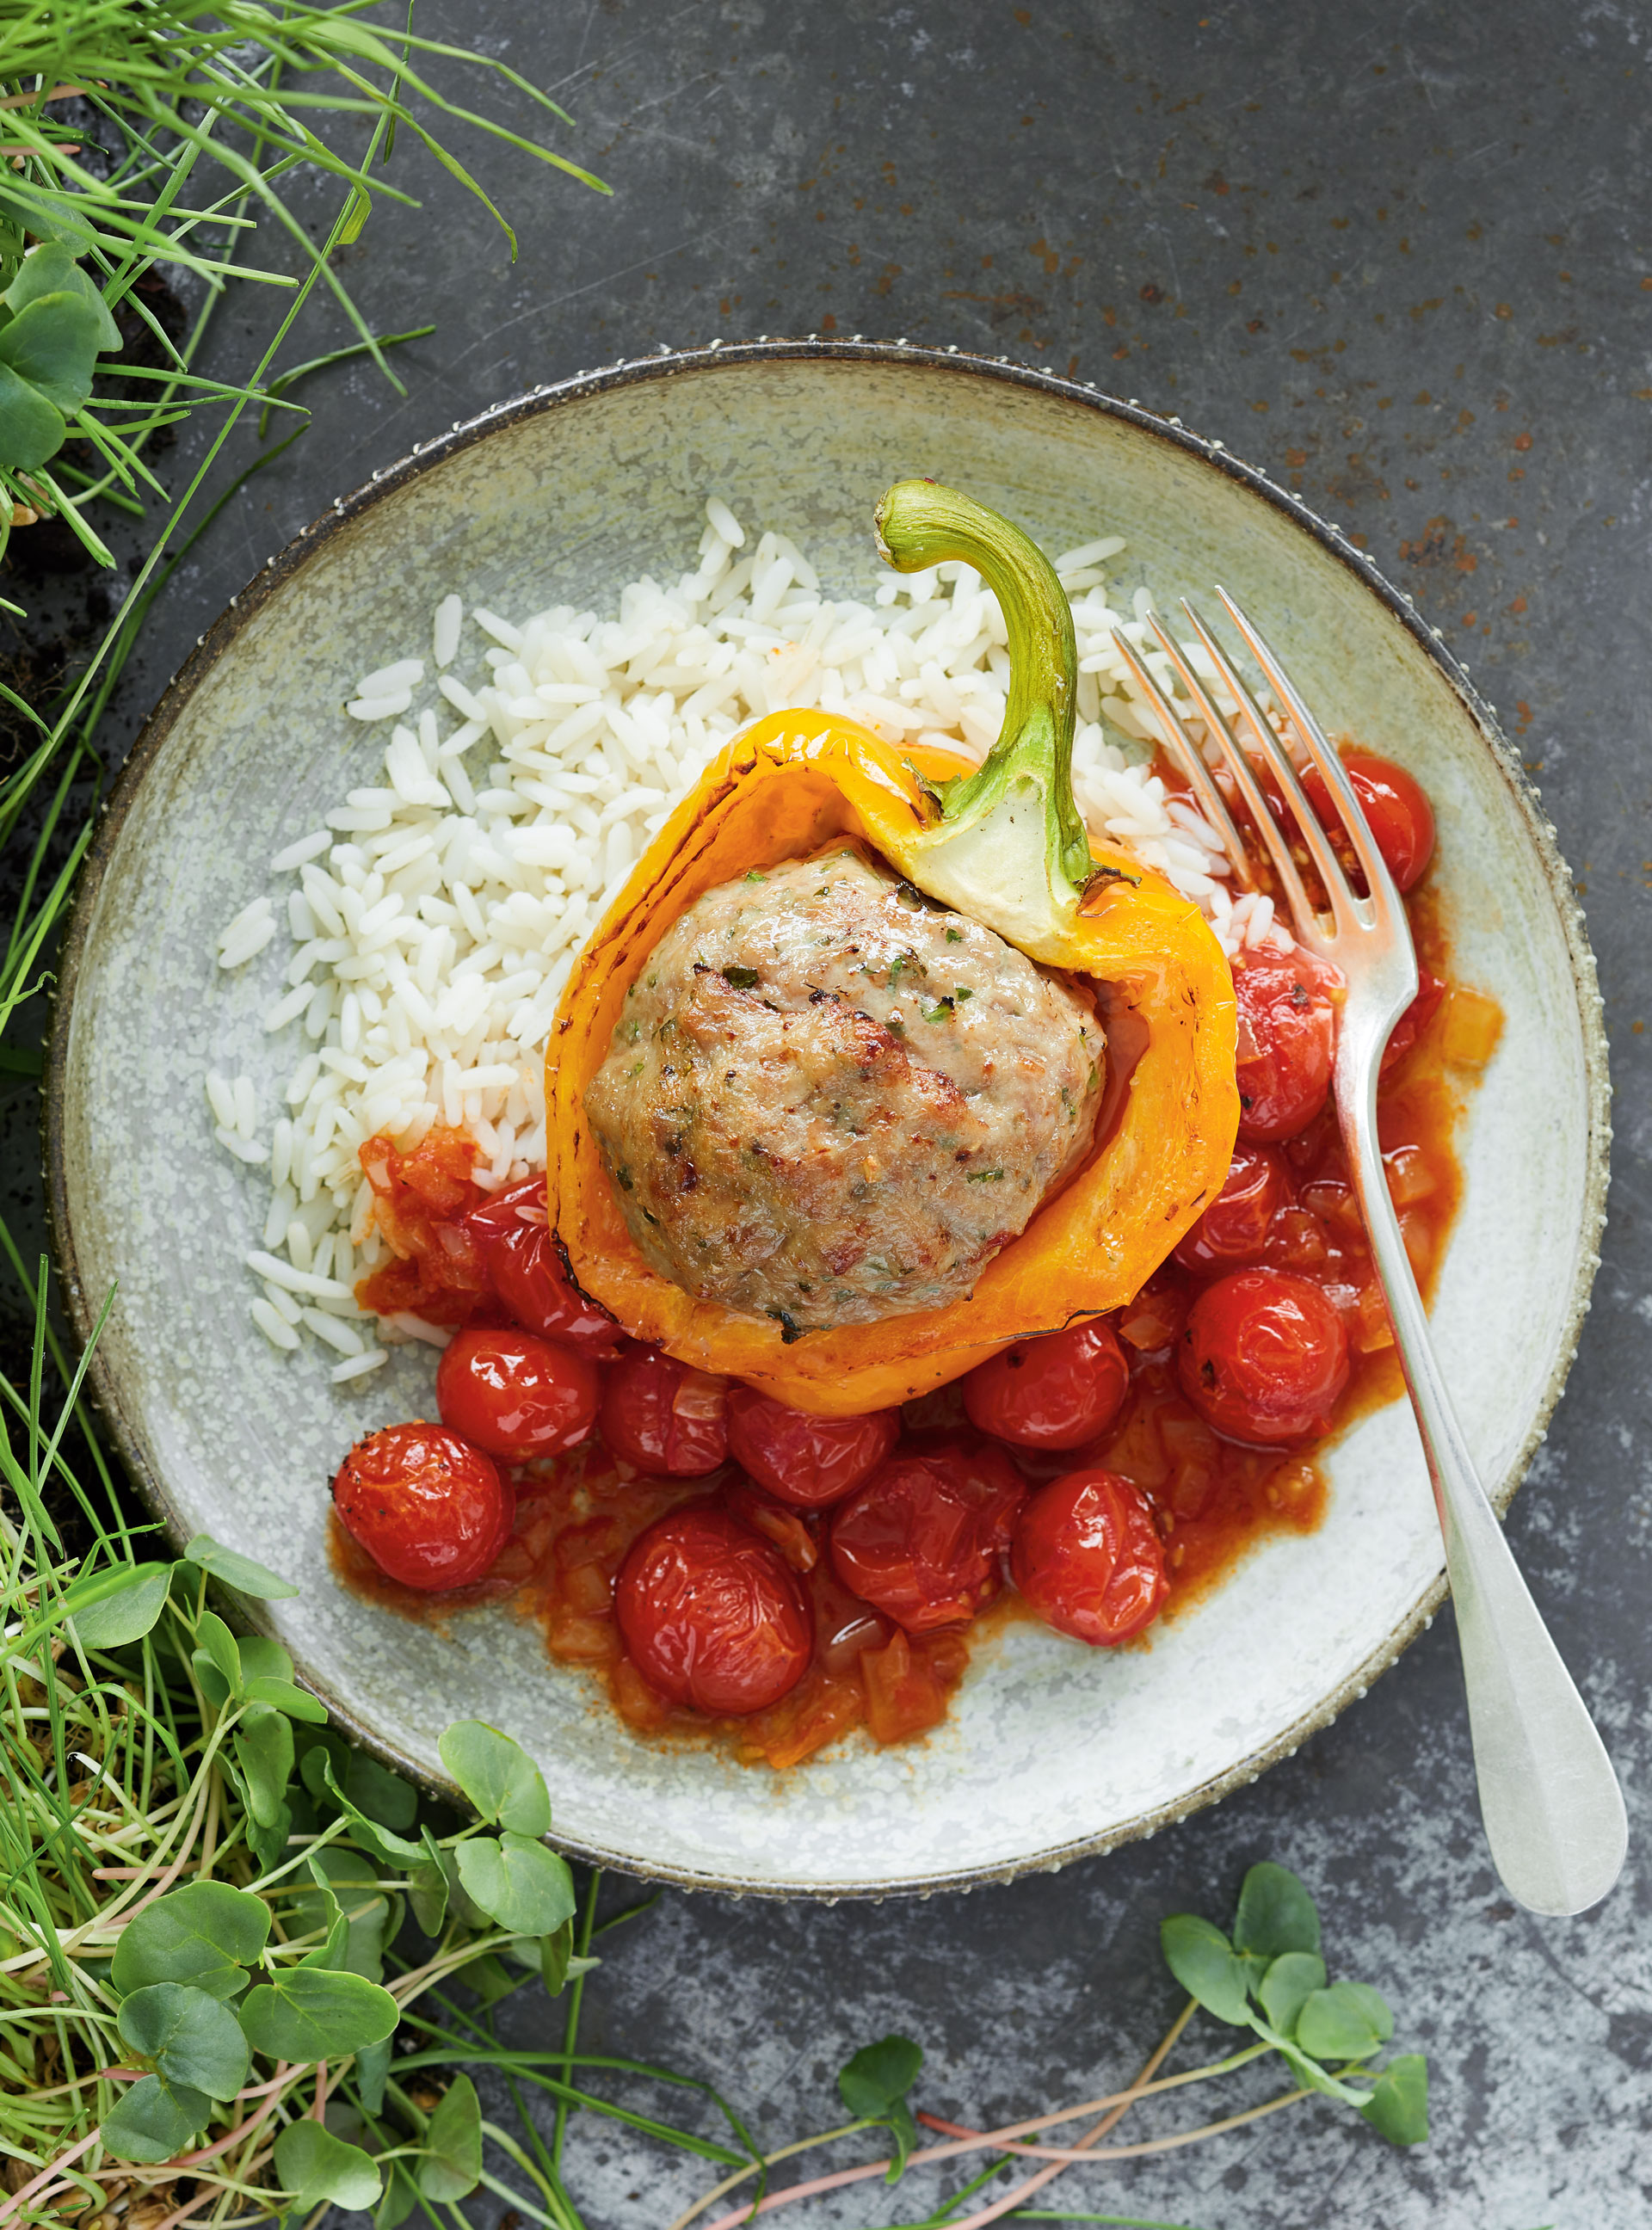 Veal-Stuffed Bell Peppers in Cherry Tomato Sauce